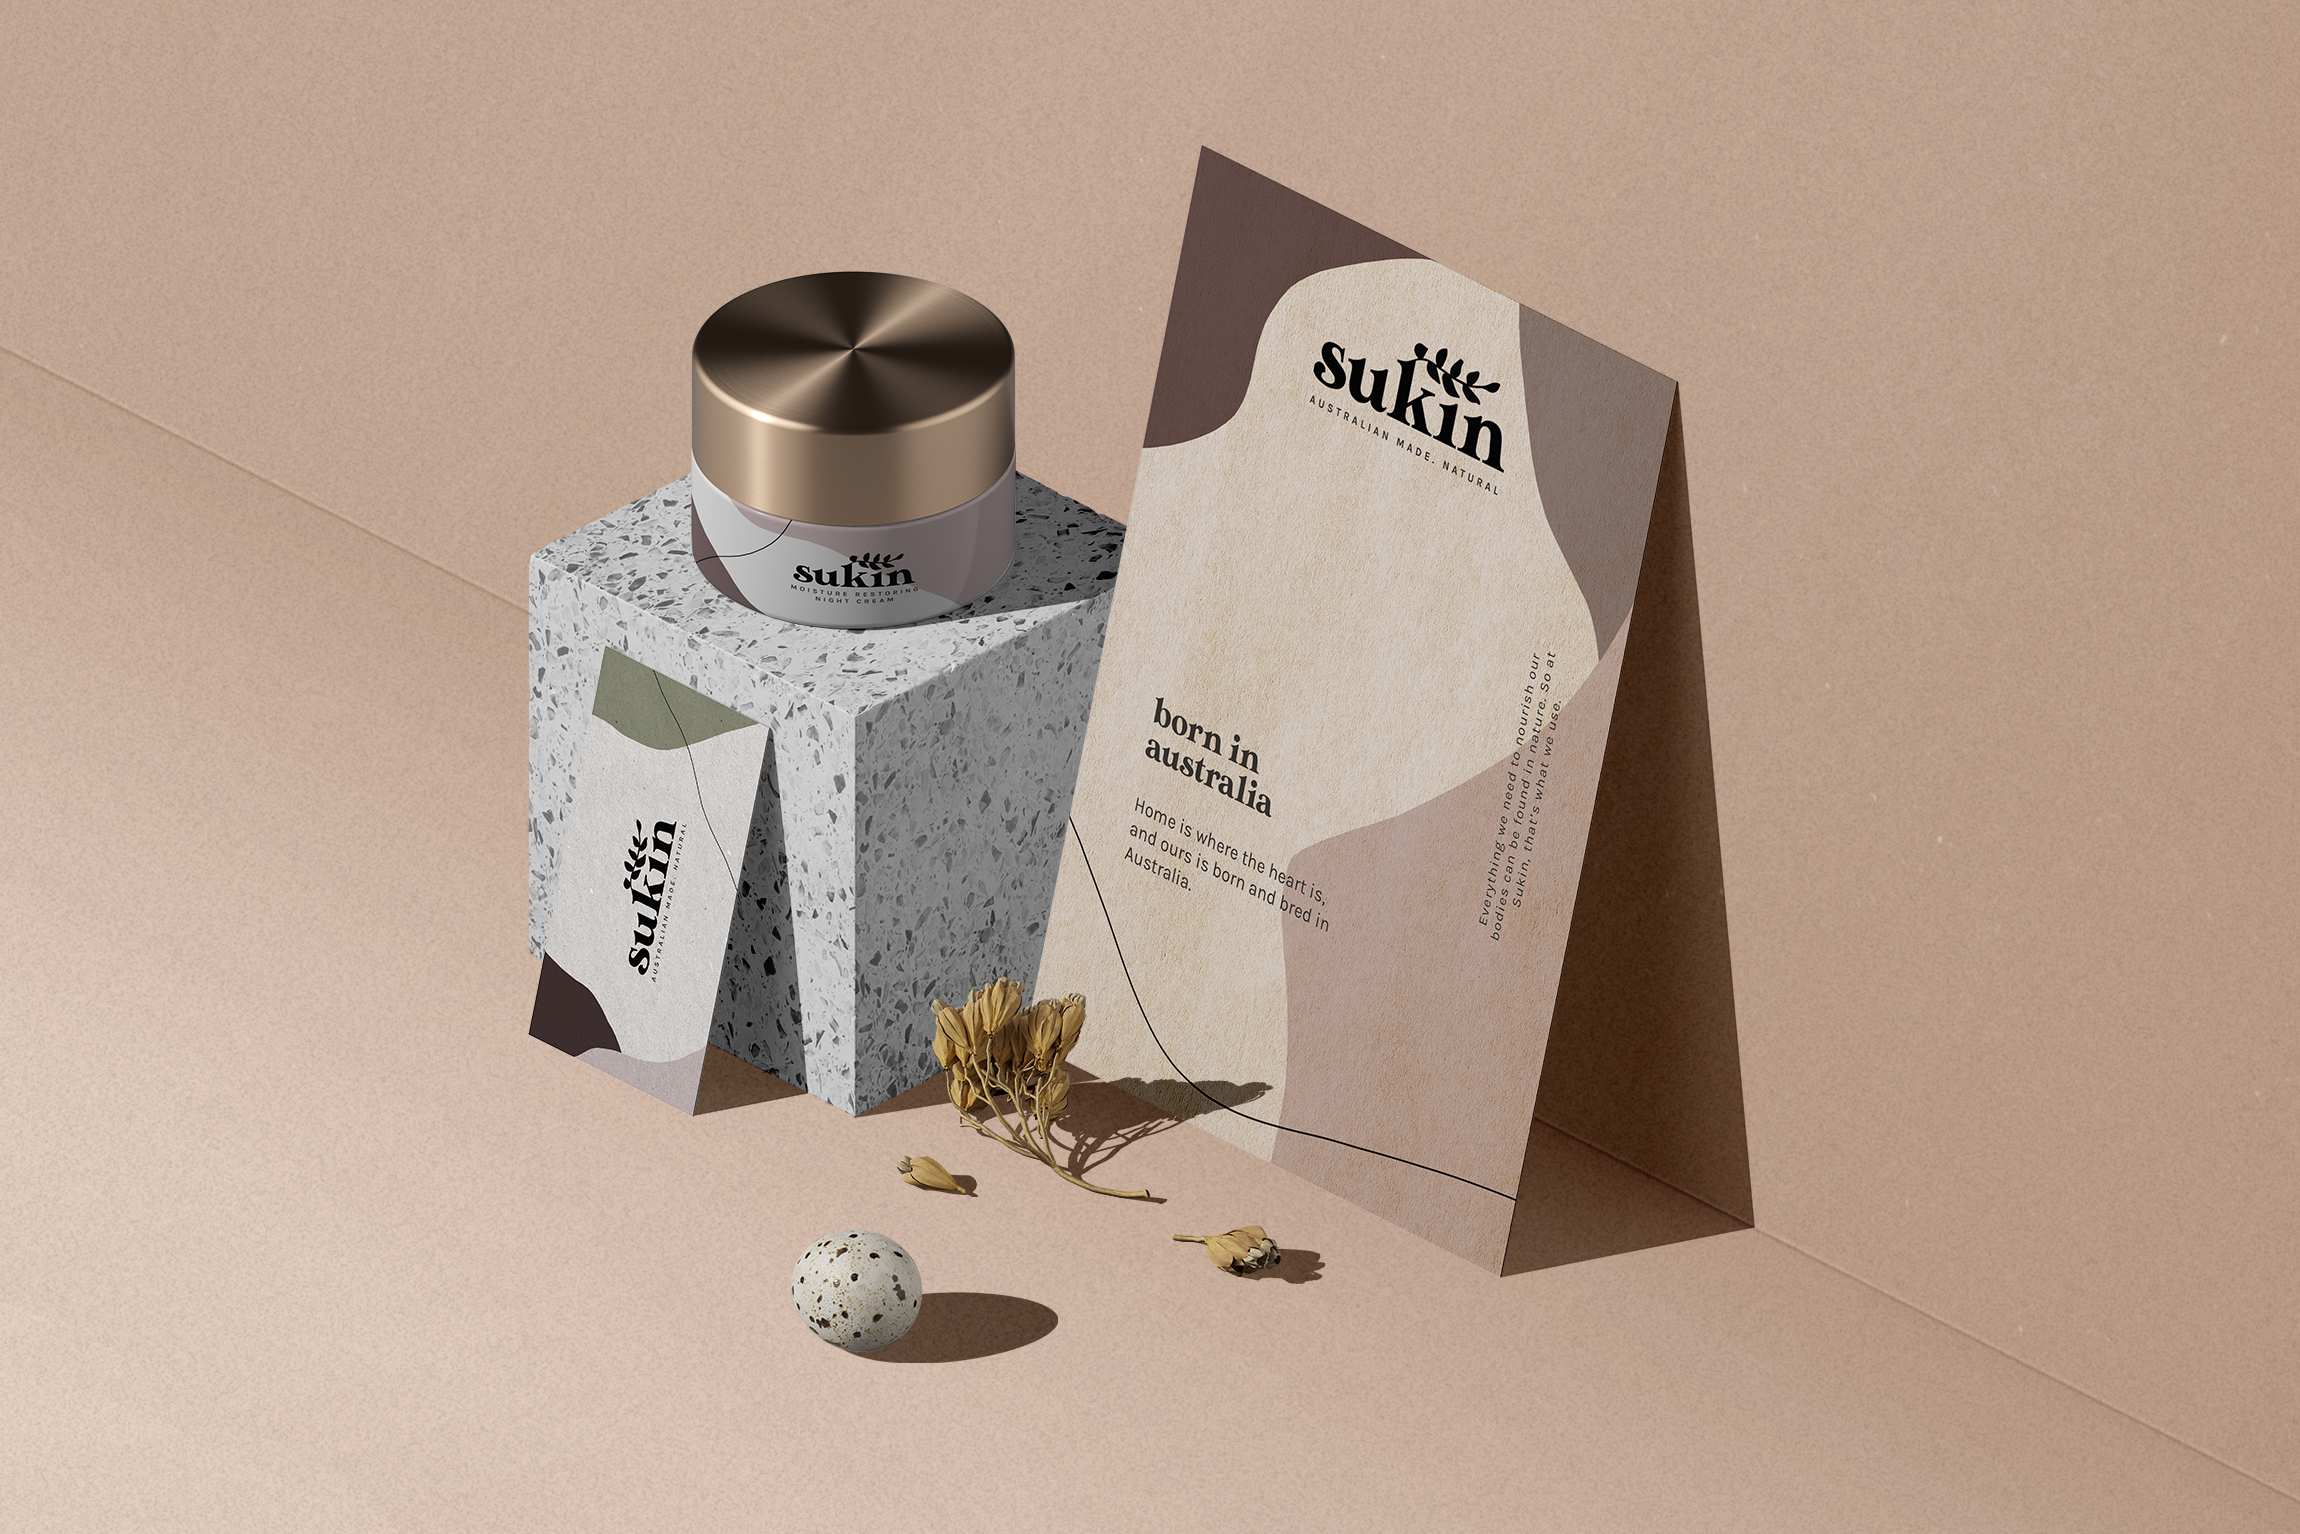 A display that is showcasing a Sukin business card leaning on a terrazzo patterned cube and a Sukin postcard slanted on a wall beside it. On top of the cube is a tubbed moisturizer with a gold lid.